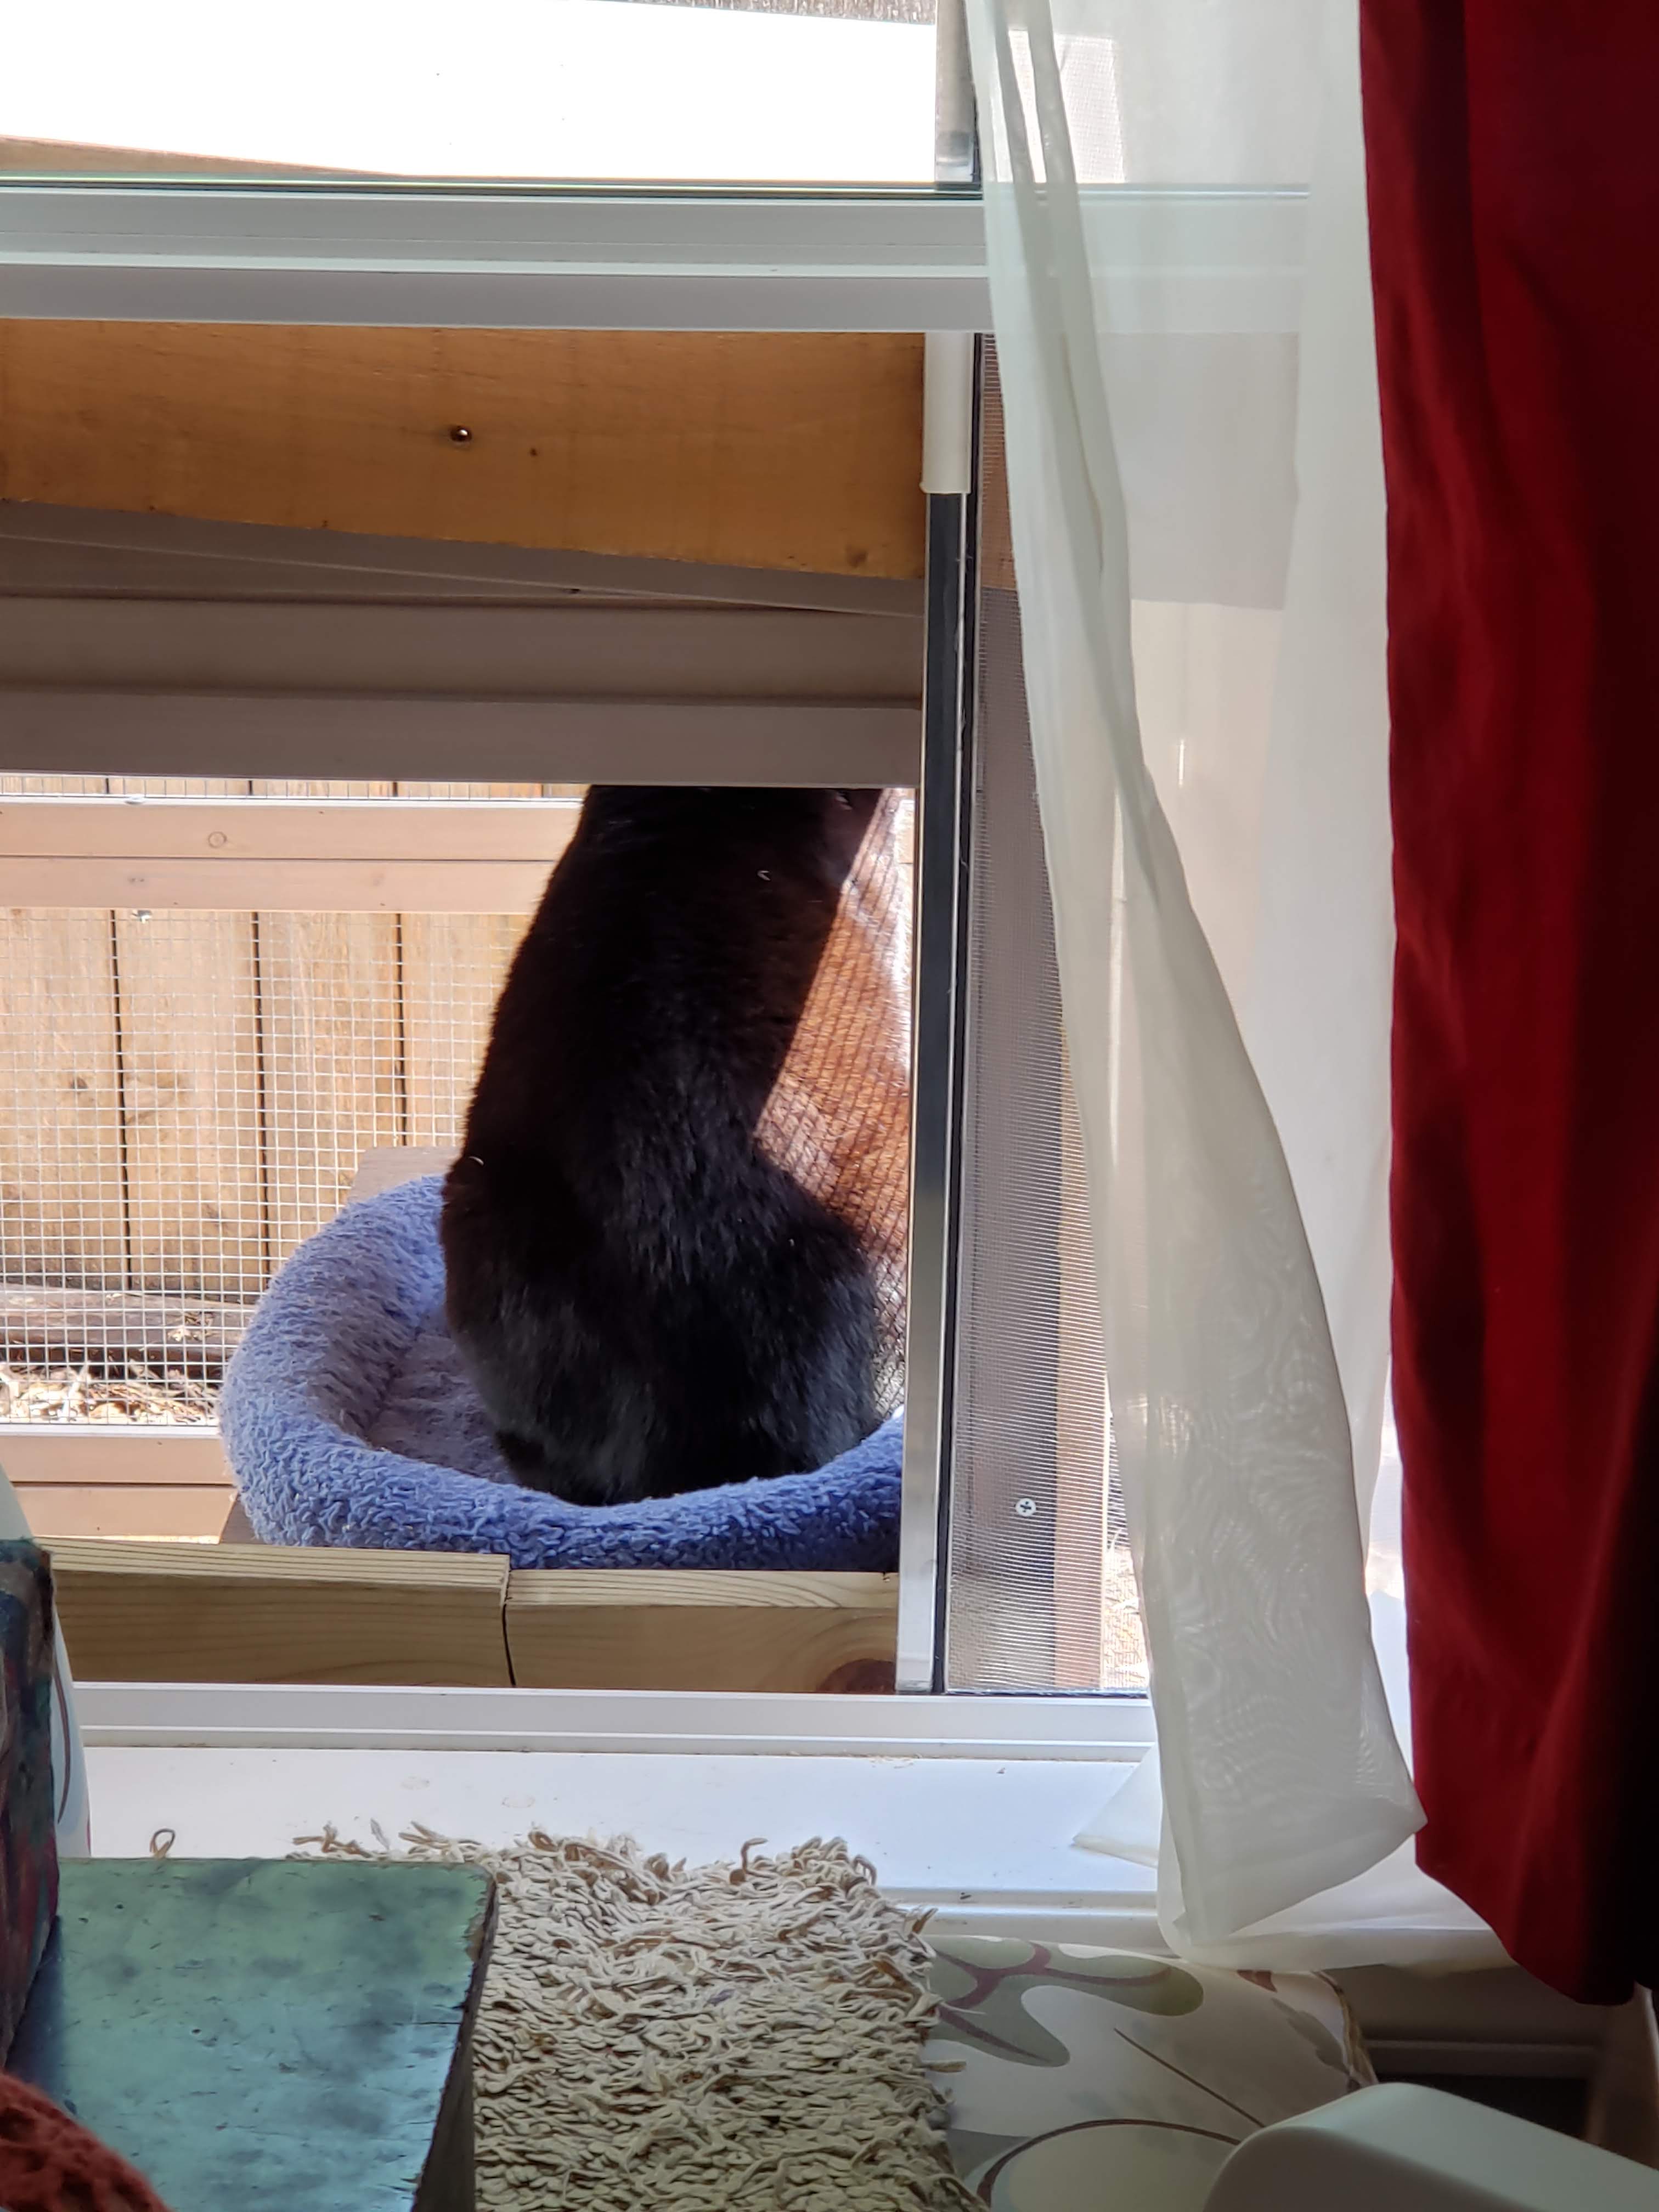 Picture of a window, a black cat sits on a blue cat bed that is located on a wooden perch just outside the window, contained within a screened in cage.